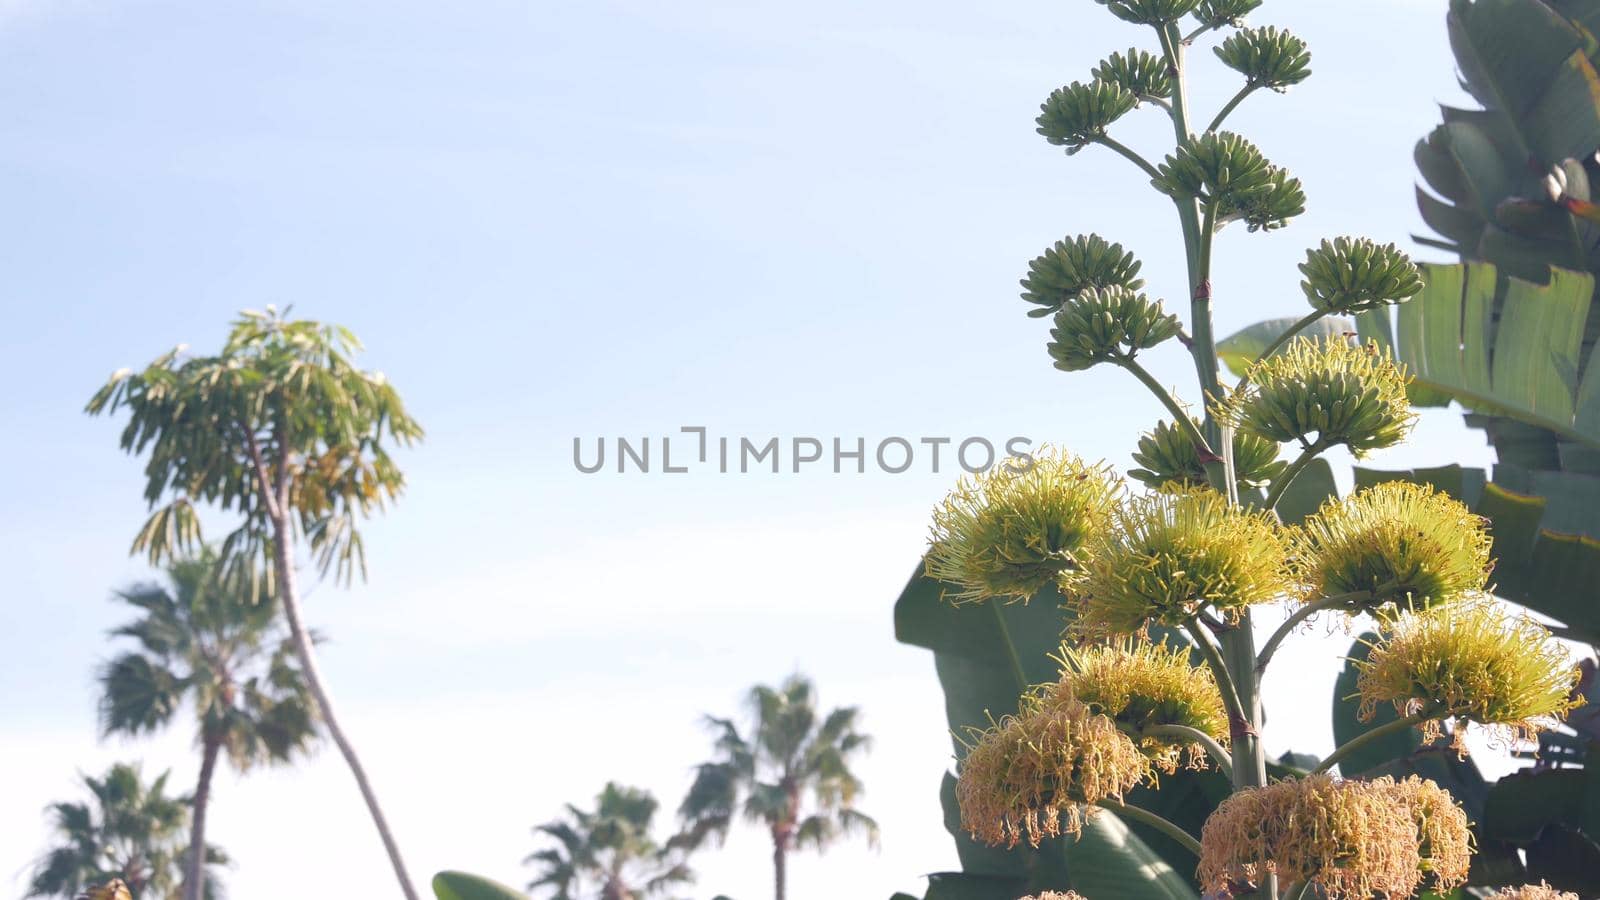 Yellow agave or aloe exotic flower panicle, century or sentry plant bloom, succulent blossom or inflorescence. Blue clear sunny summer sky, flowering maguey and palm tree, California flora, USA garden